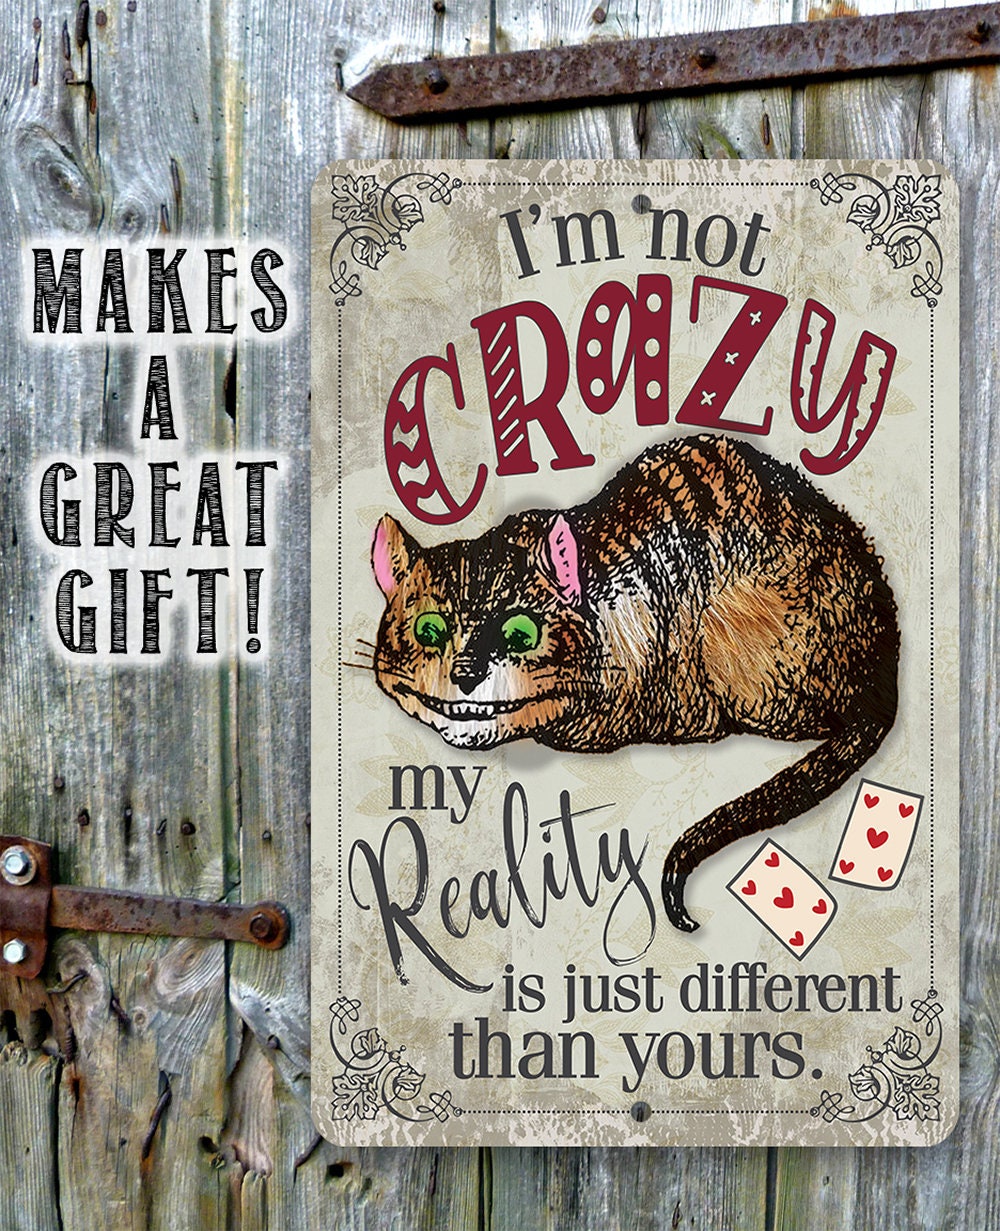 I'm Not Crazy, My Reality is Just Different Than Yours - 8" x 12" or 12" x 18" Aluminum Tin Awesome Metal Poster Lone Star Art 